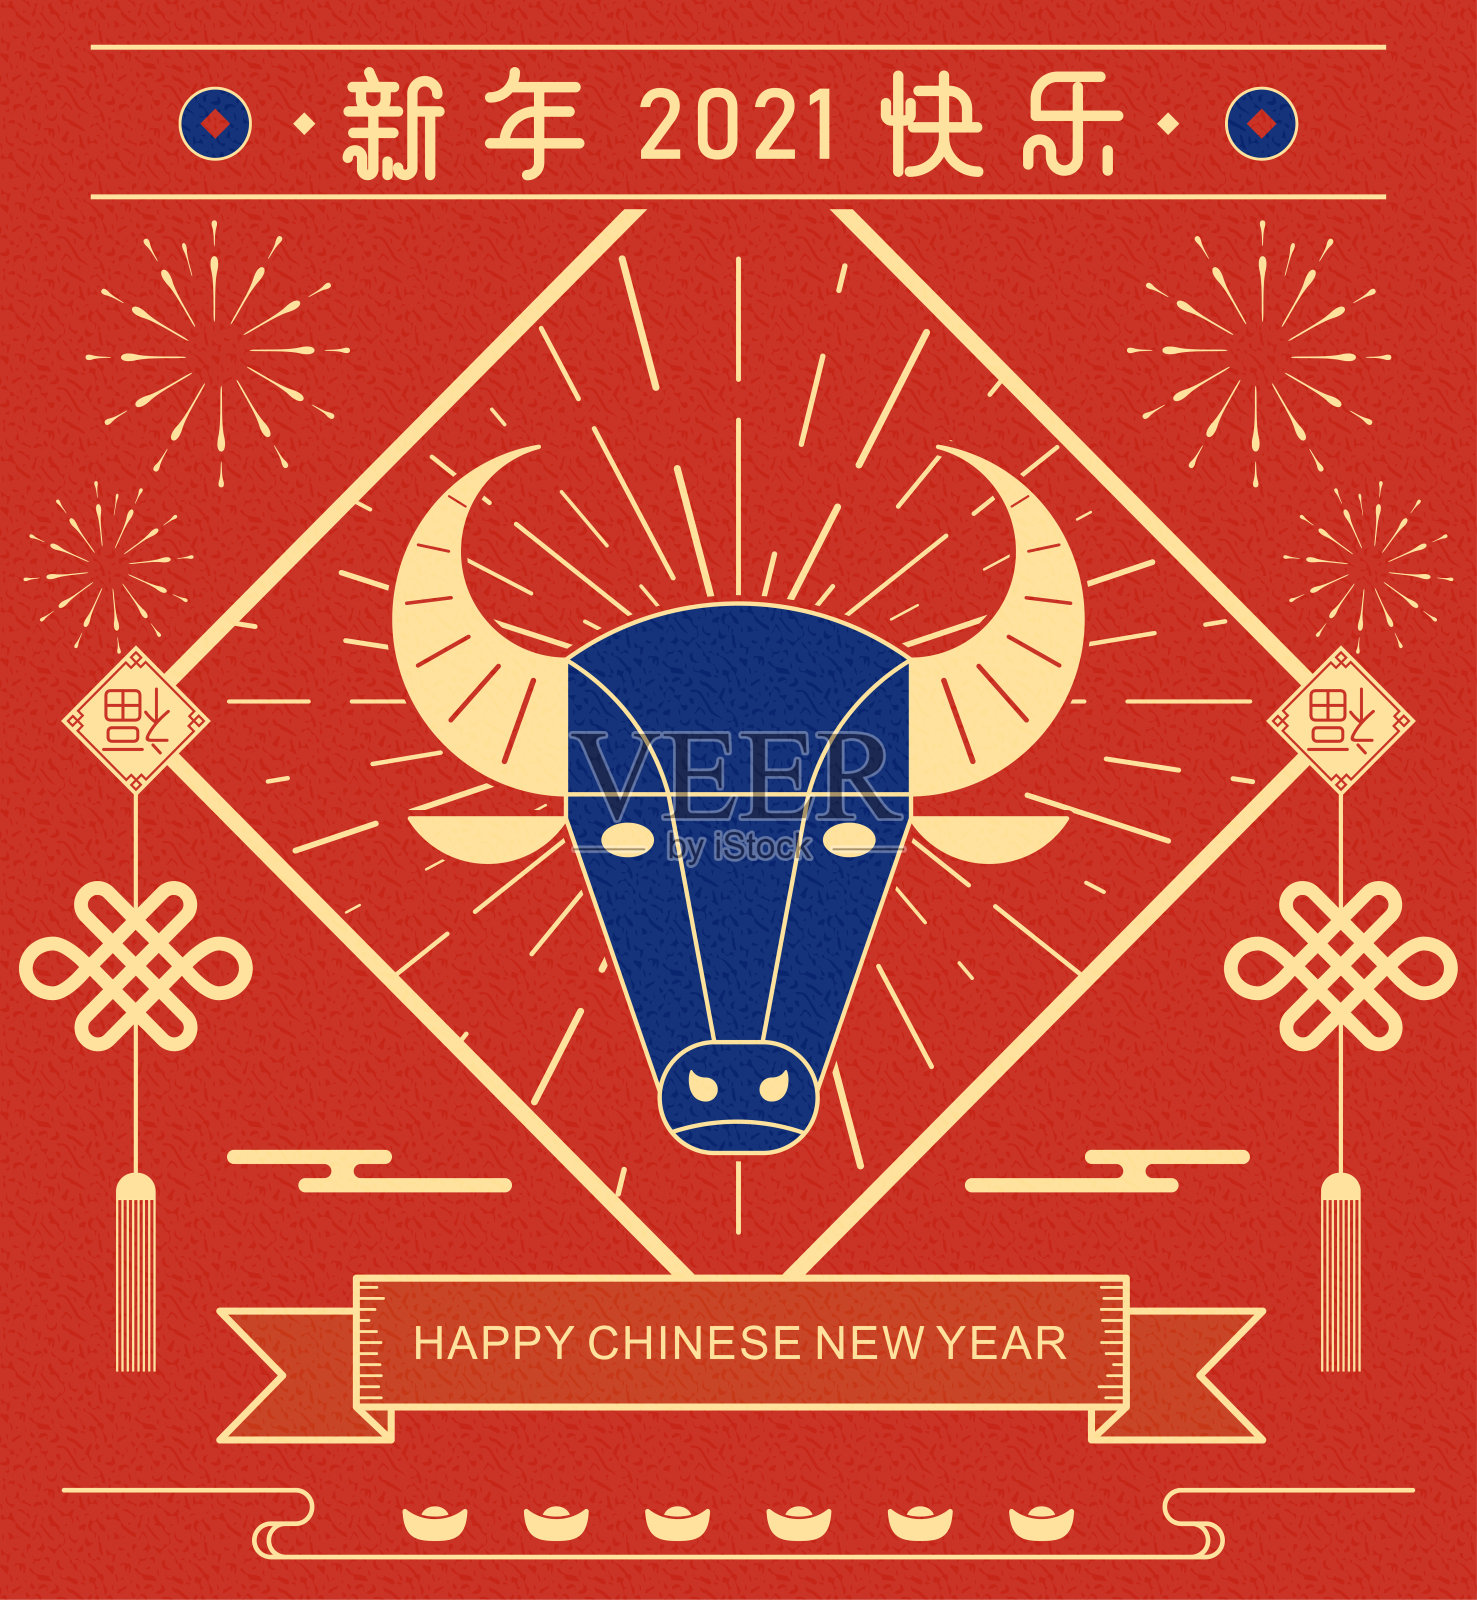 Happy Chinese New Year greeting card 2021. Outline decoration icons. Golden Bull Head . Zodiac sign ox, cow or bull. Lunar horoscope, calendar.设计模板素材